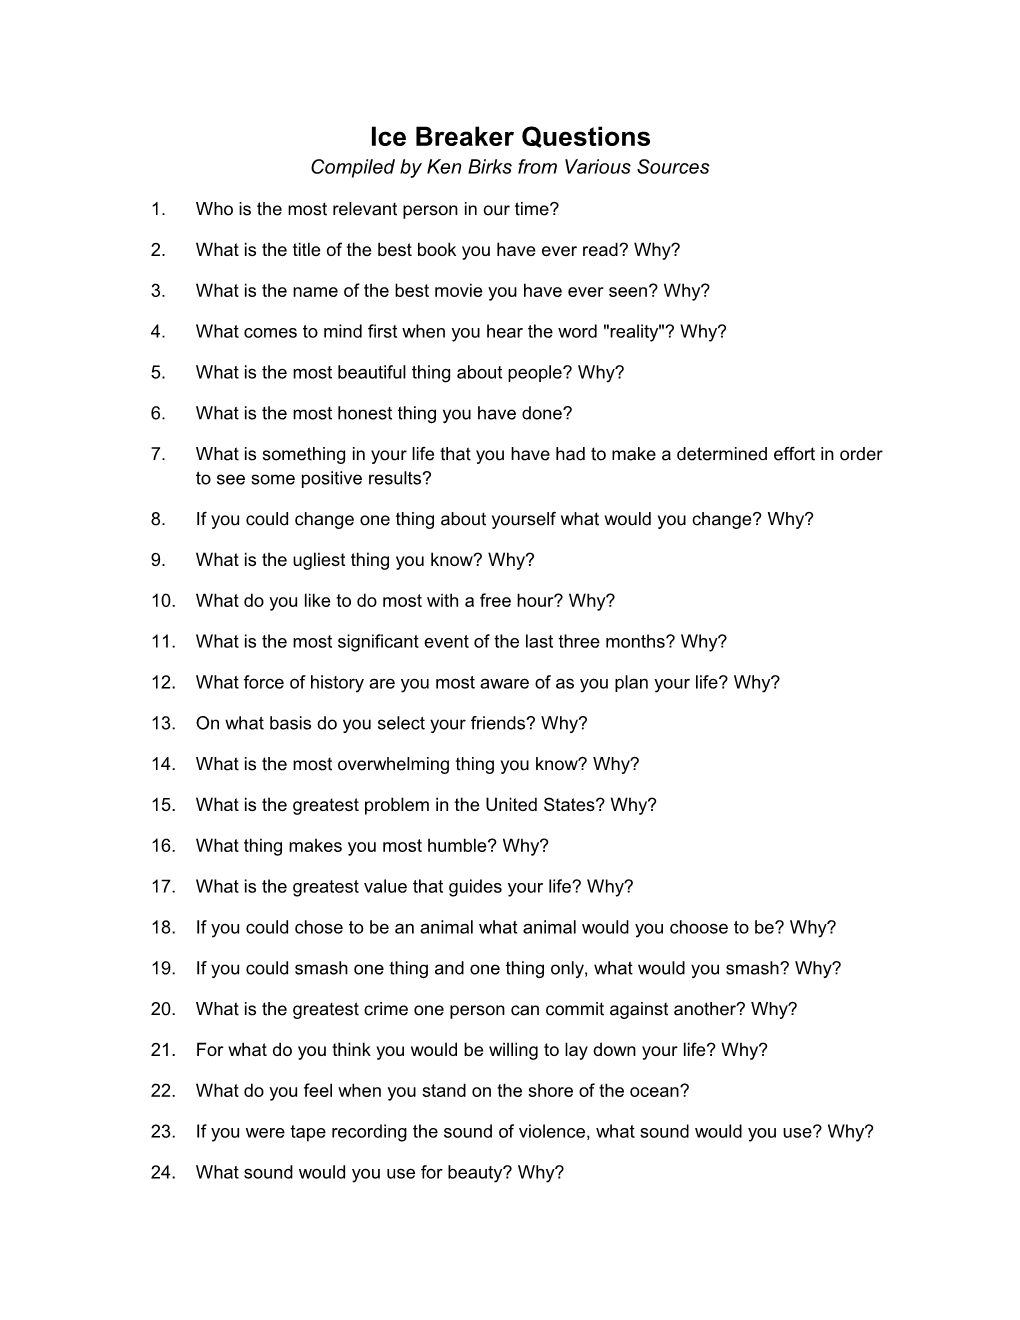 Ice Breaker Questions Compiled by Ken Birks from Various Sources